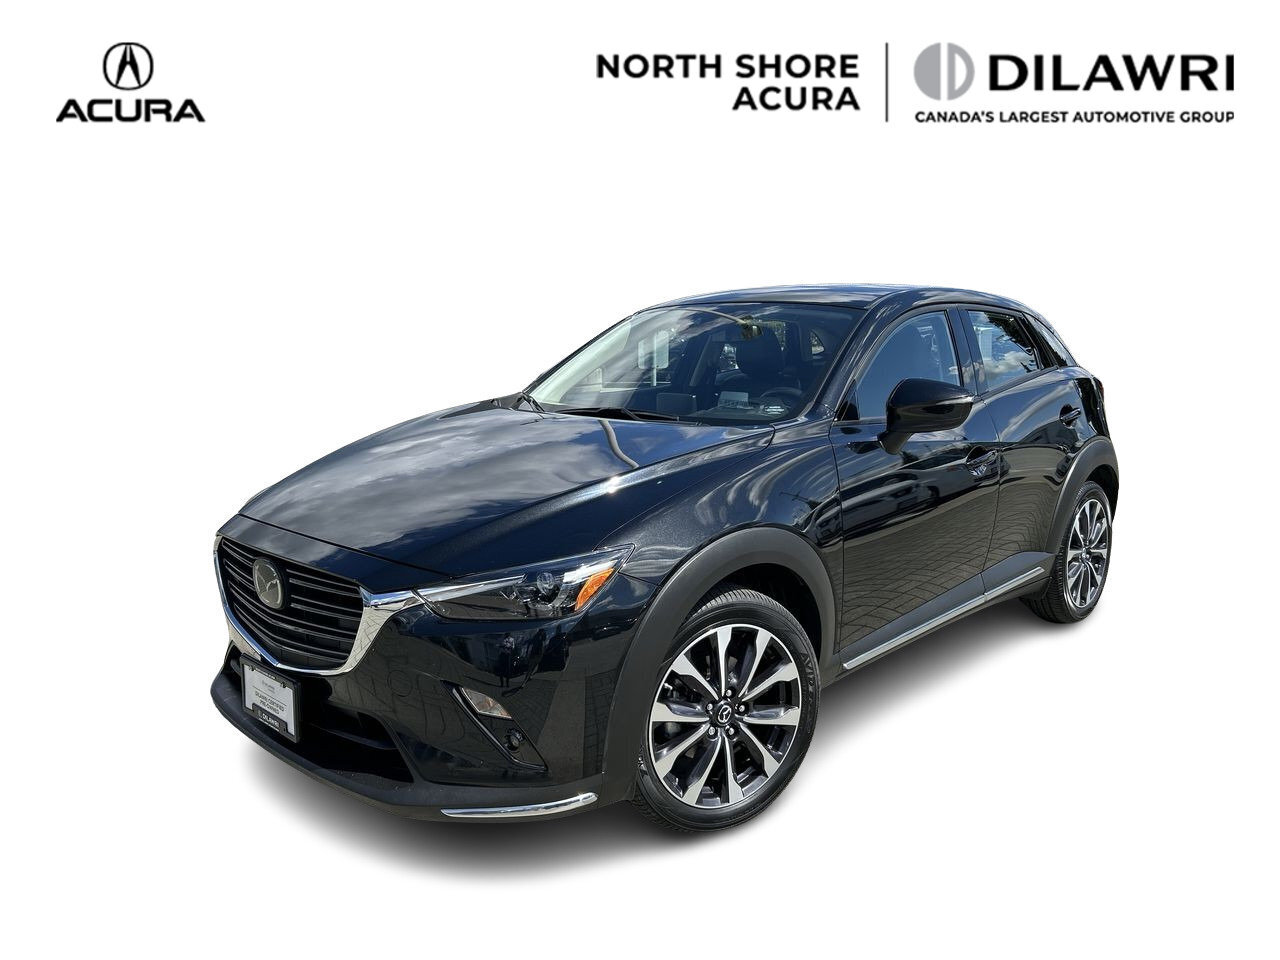 2019 Mazda CX-3 GT AWD at ** Fully Loaded, AWD, Leather, Sunroof *